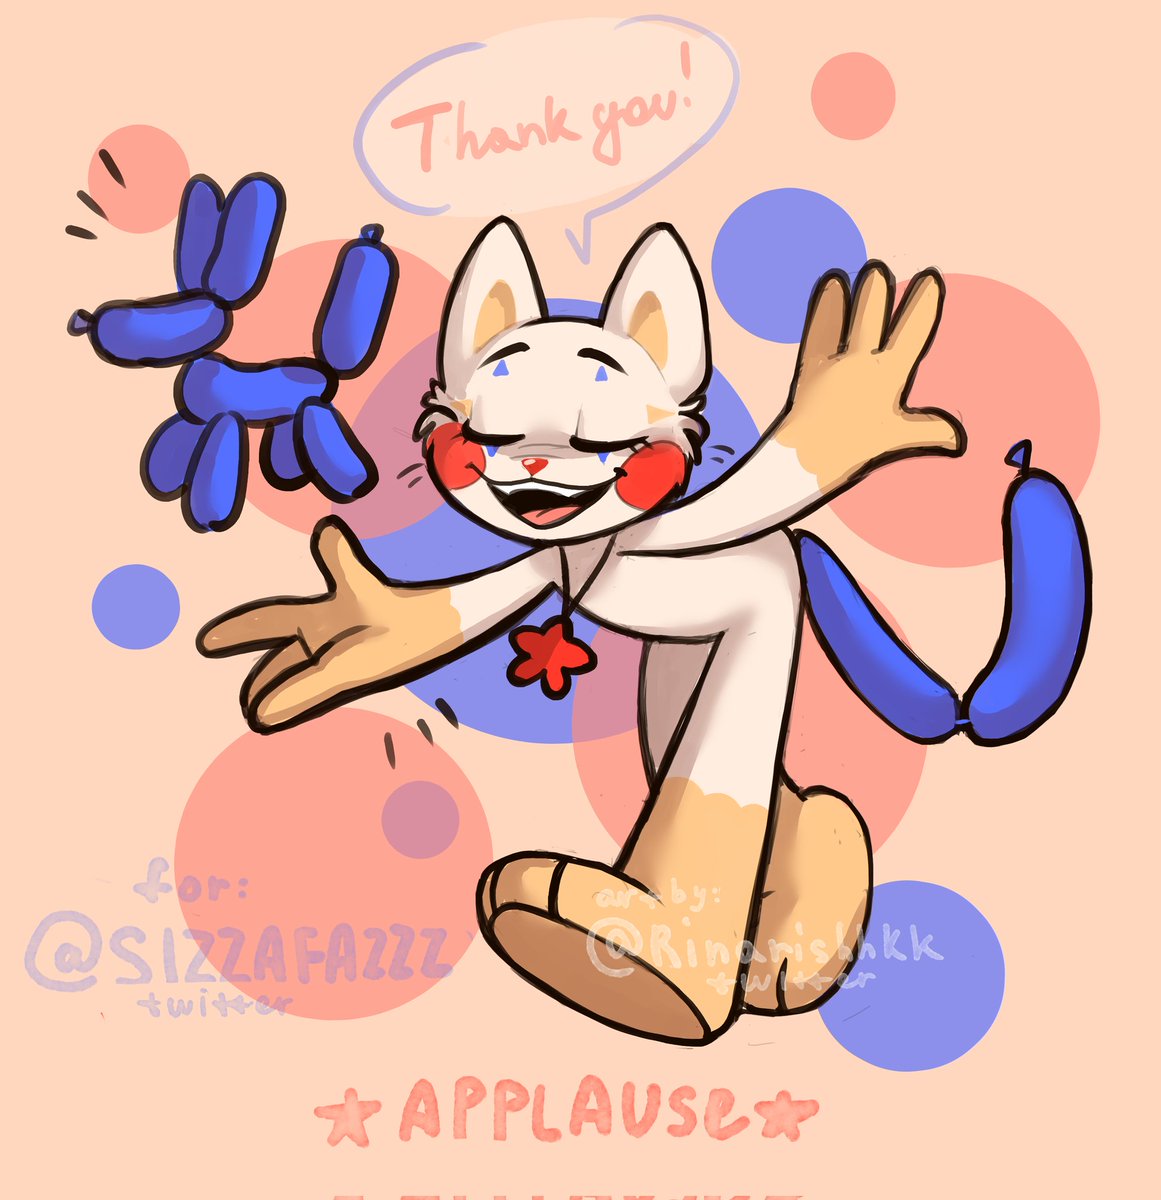 this cat is so funny and cute

for the author @SIZZAFAZZZ ♡
#ppt #sizzipop #gift #art #PoppyPlaytime3 #SmillingCrittersAU